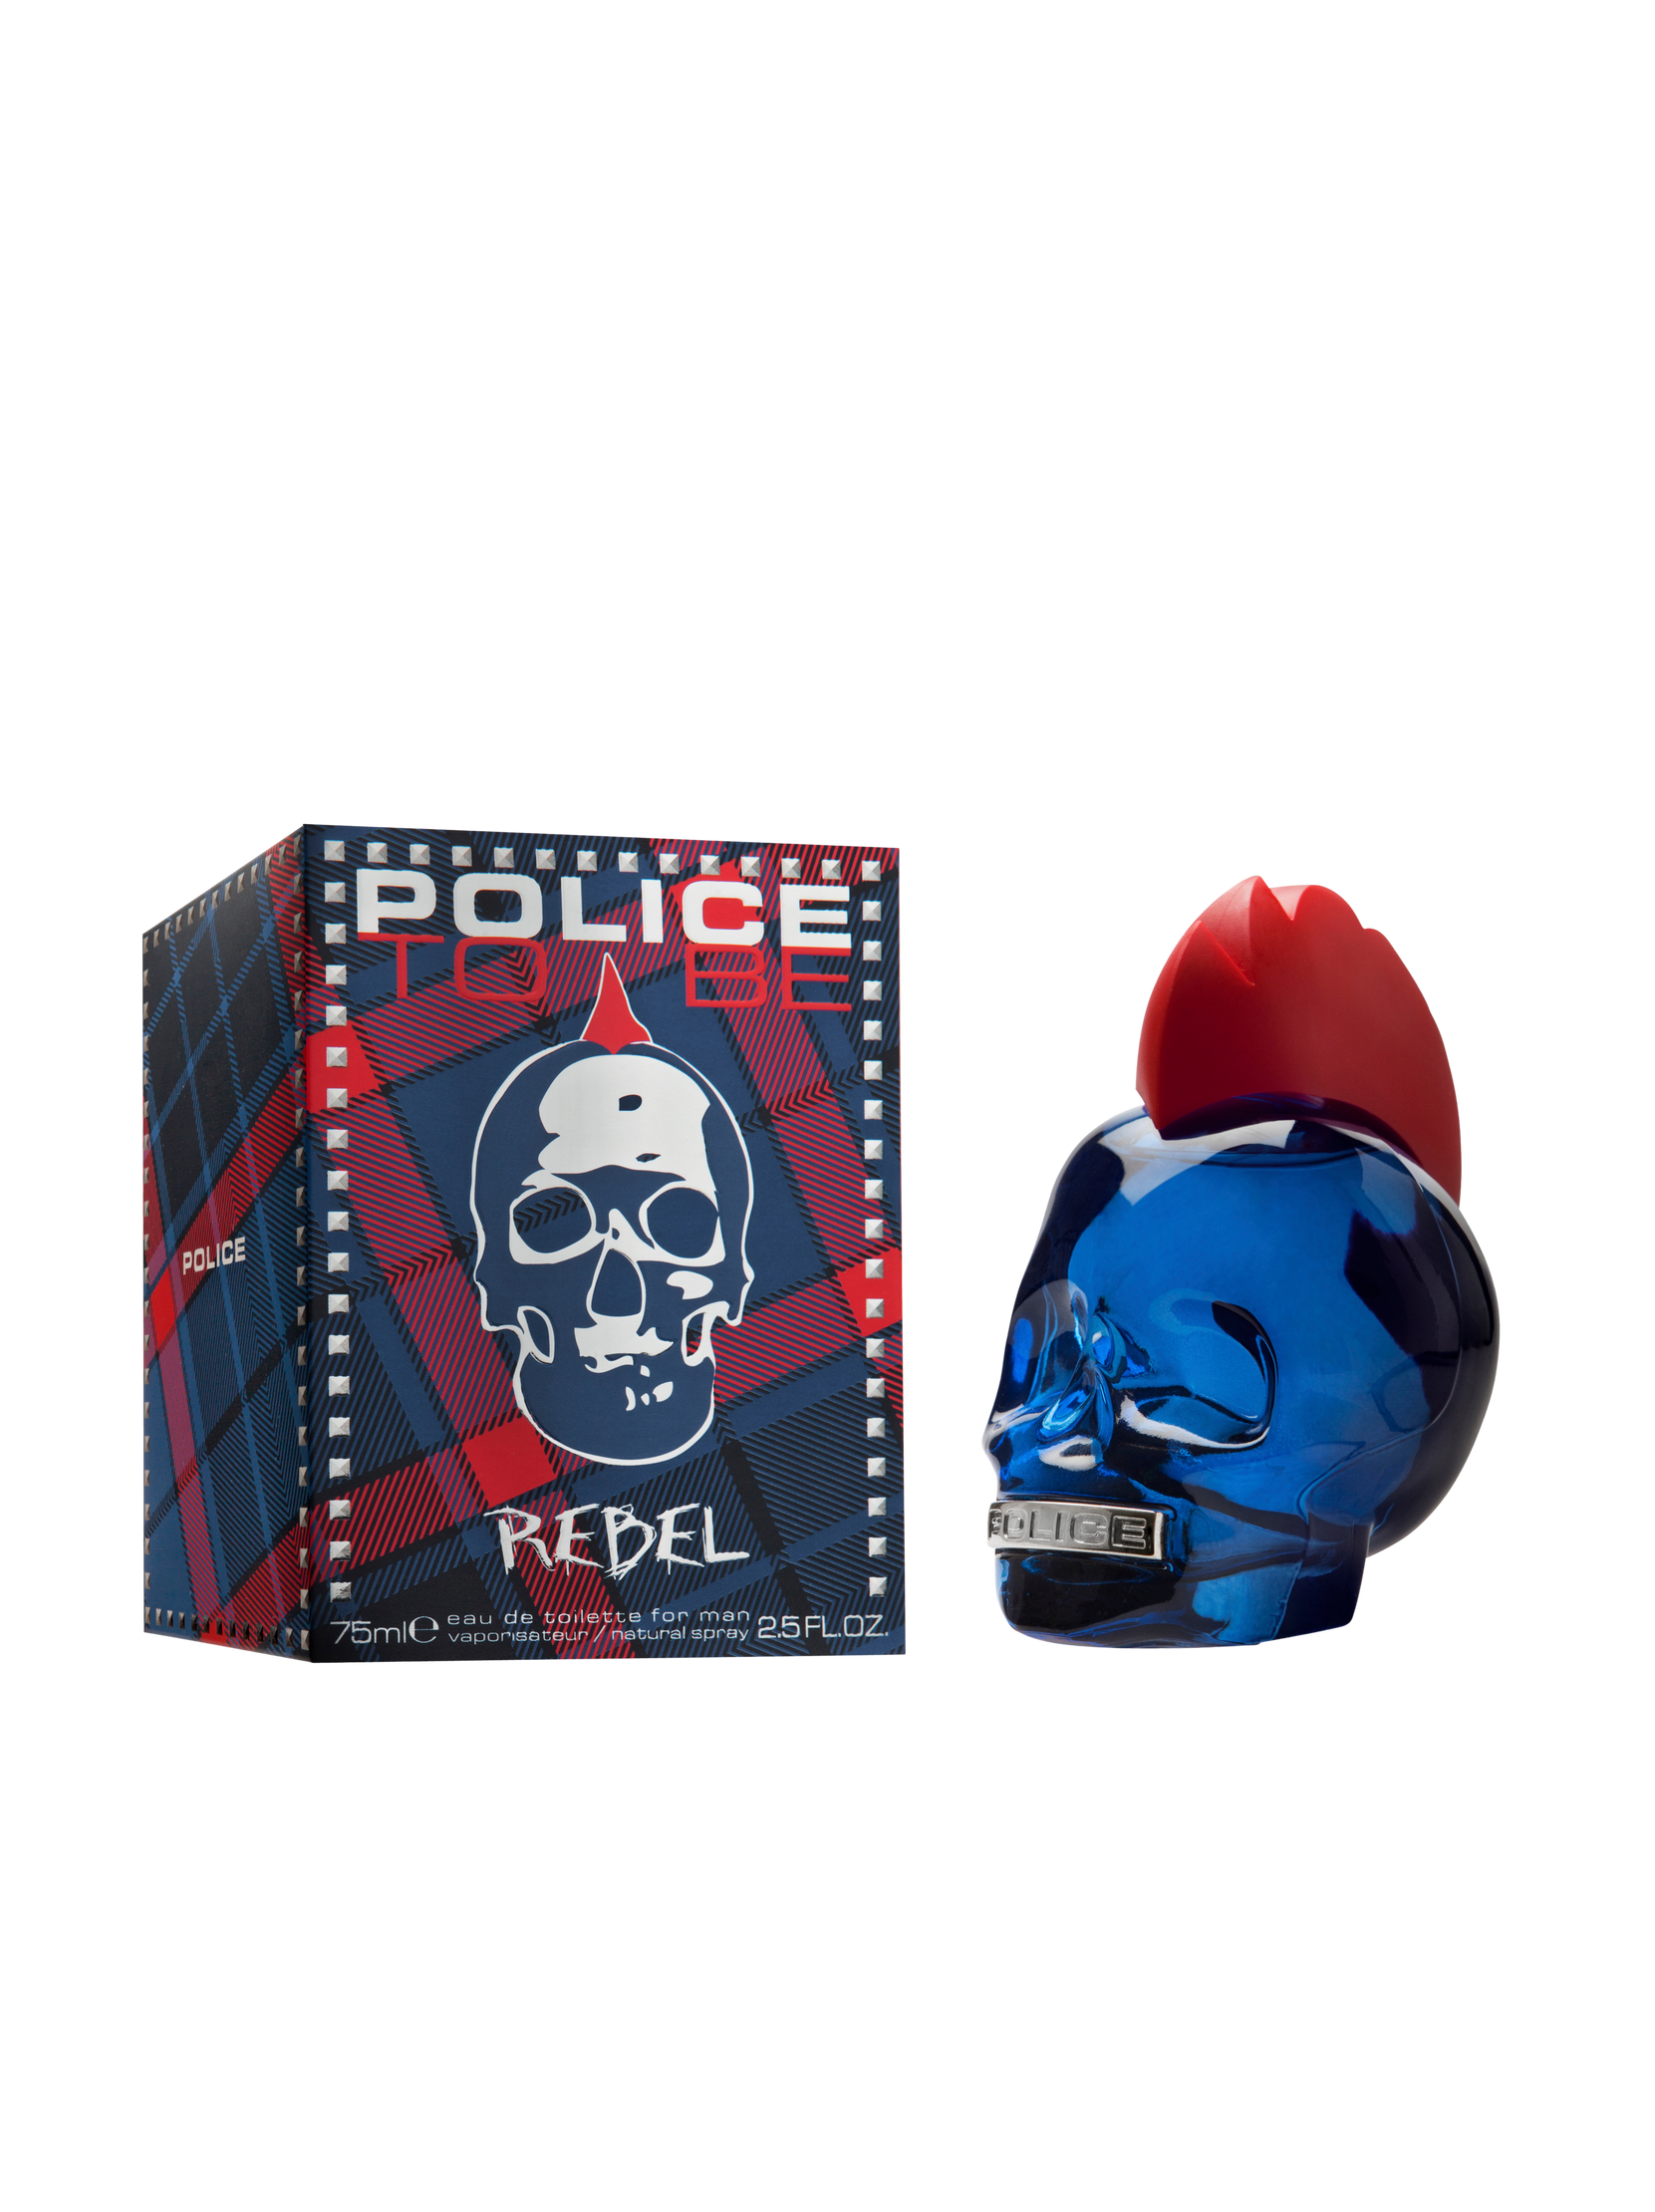 To Be Rebel Edt 75 ml, Police